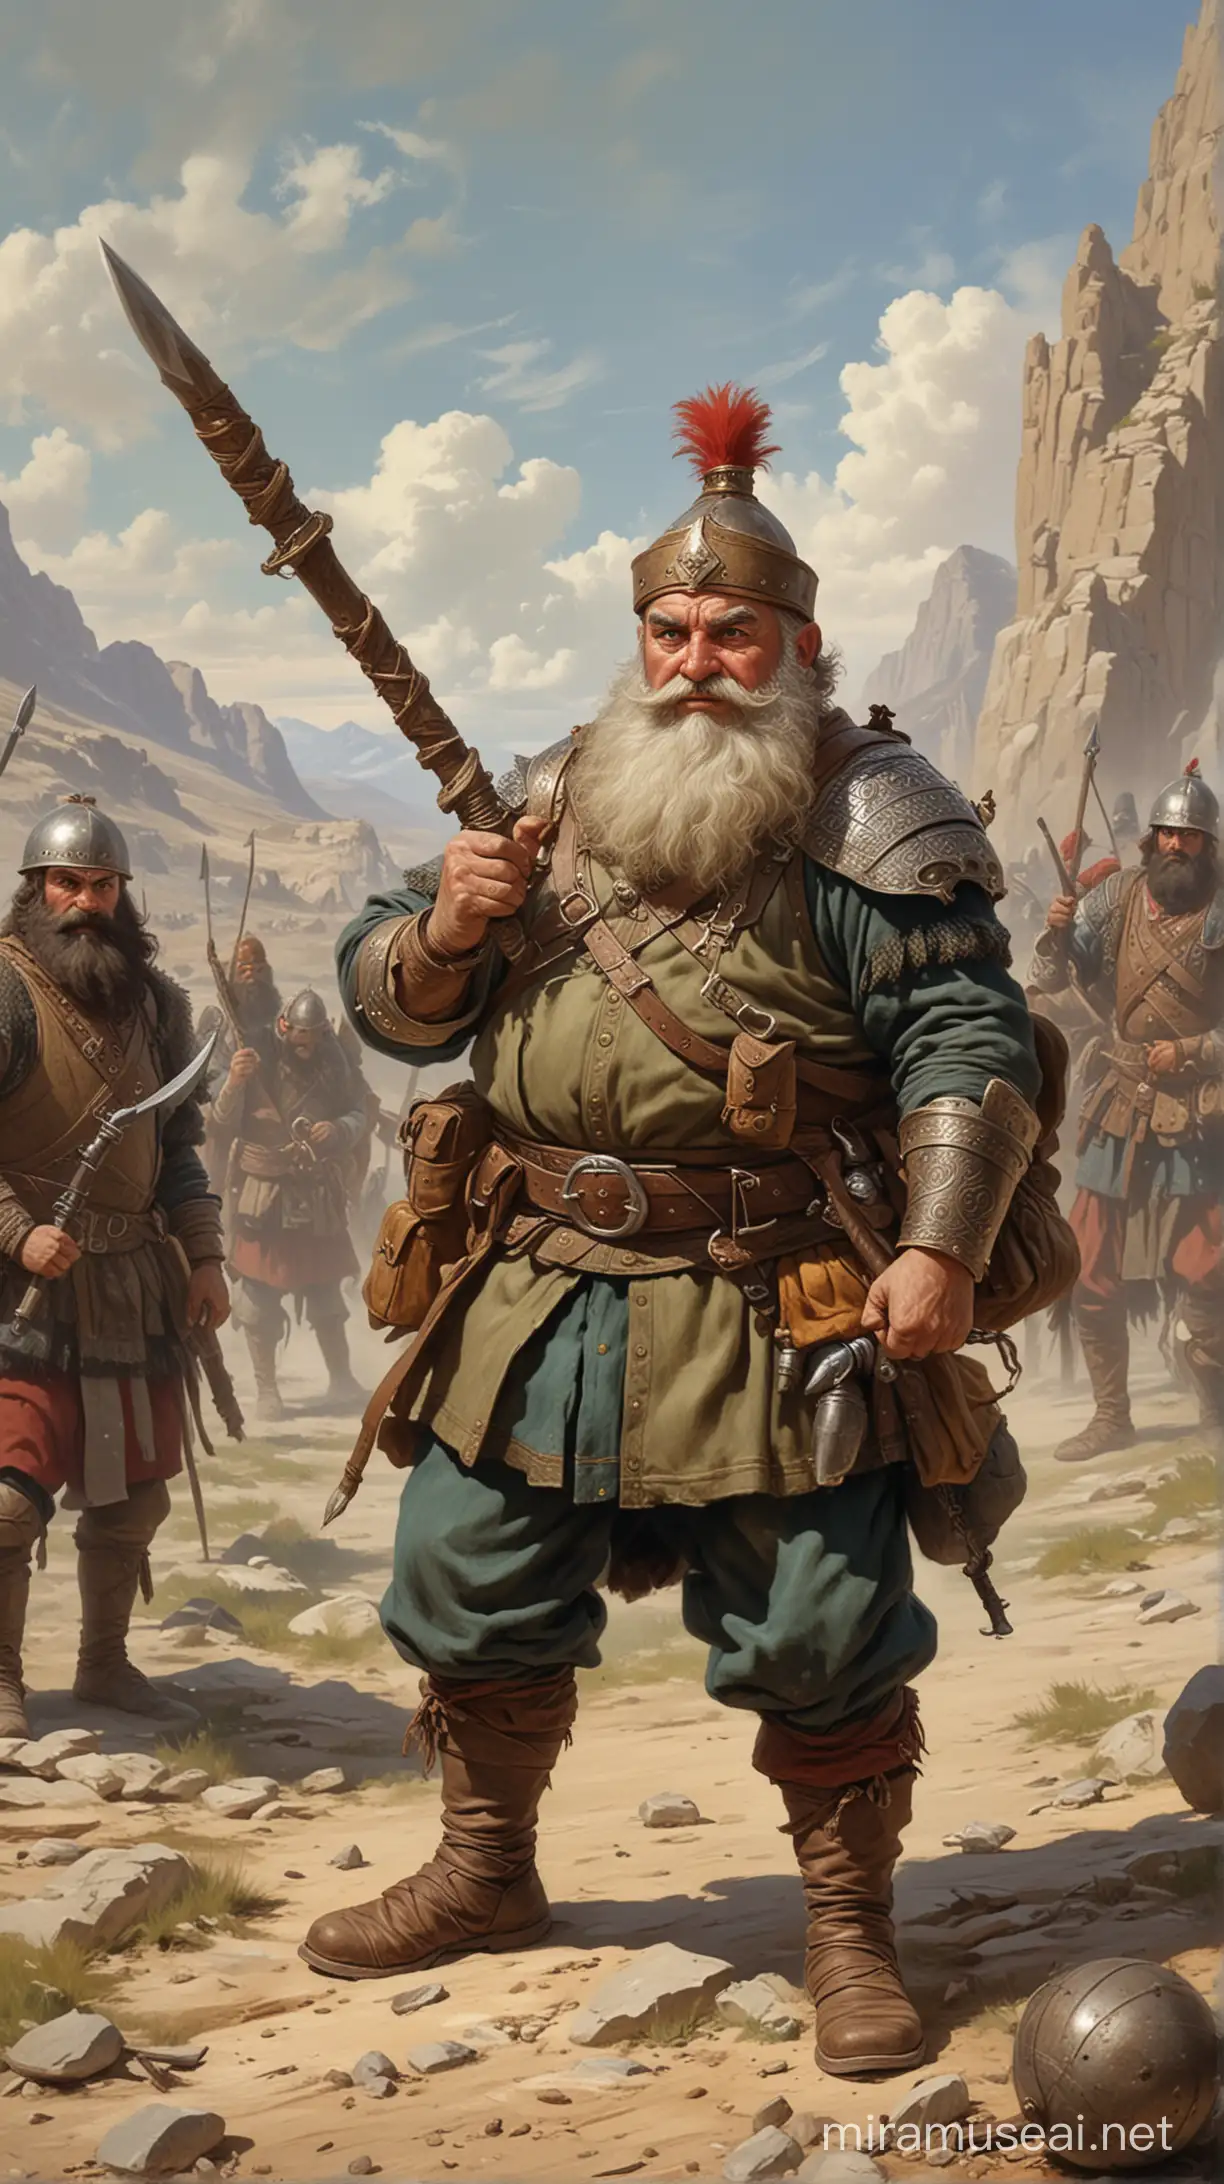 "The dwarf-sized Gürbüz Alp not only stood out on the battlefield with his mace but also with his unmatched courage and quirky demeanor" - Image illustrating Gürbüz Alp's position in battle, catching attention not only with his mace but also with his bravery and peculiar character.

